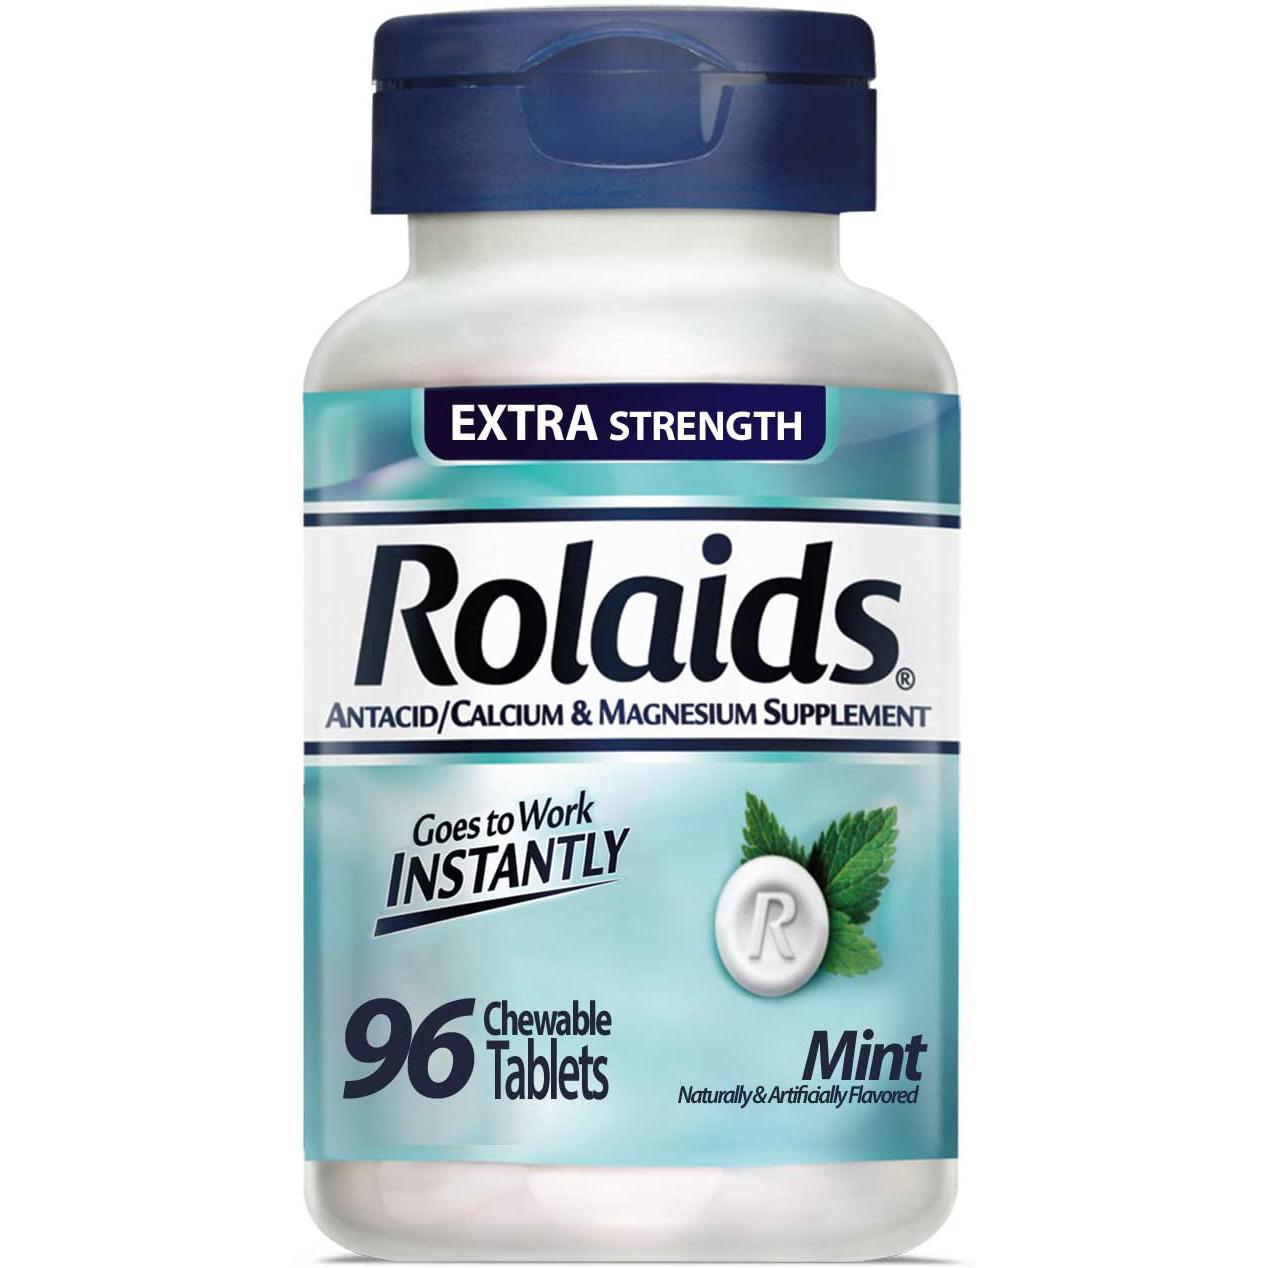 96 Rolaids Extra Strength Tablets Mint for $2.85 Shipped